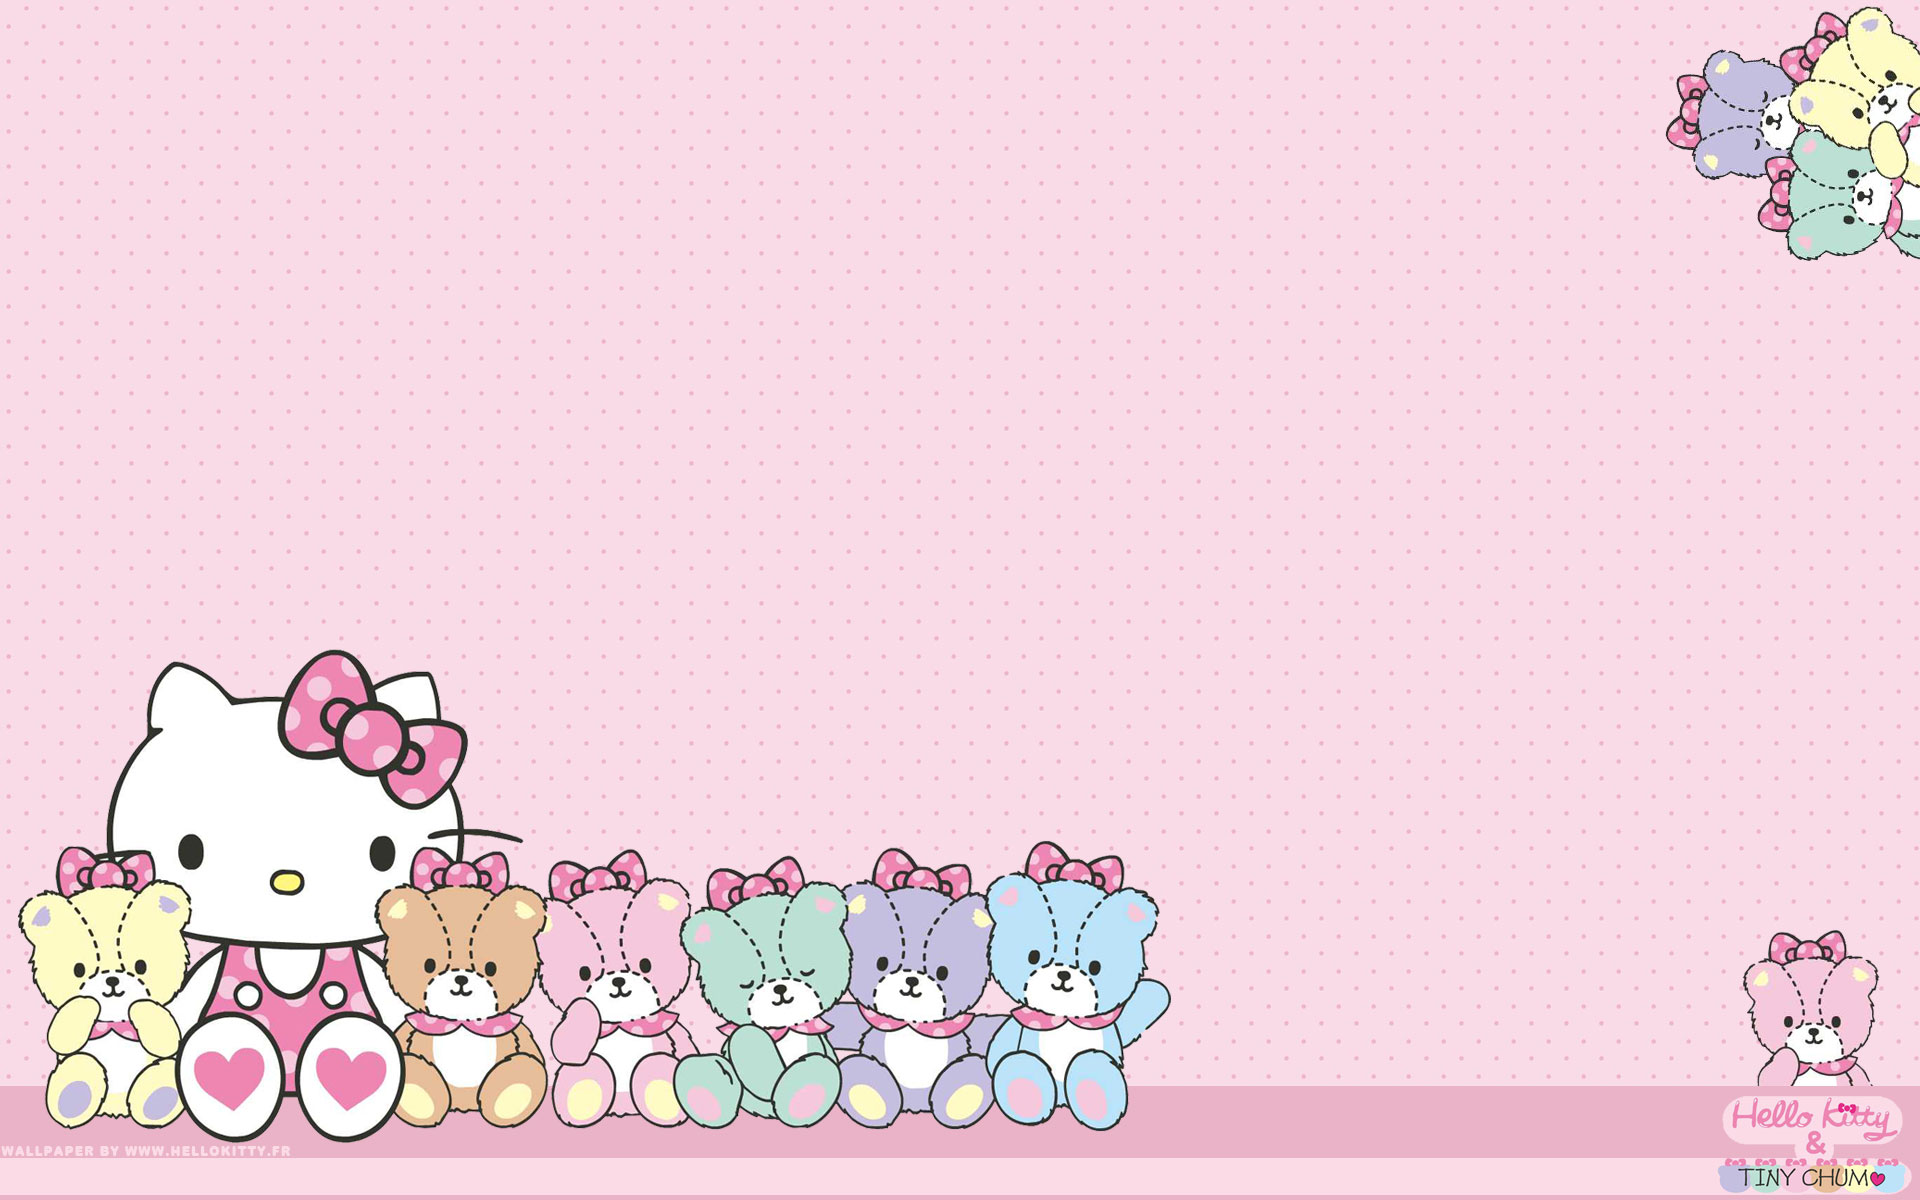 Free Download Hello Kitty Wallpapers Wallpaper High Definition Images, Photos, Reviews